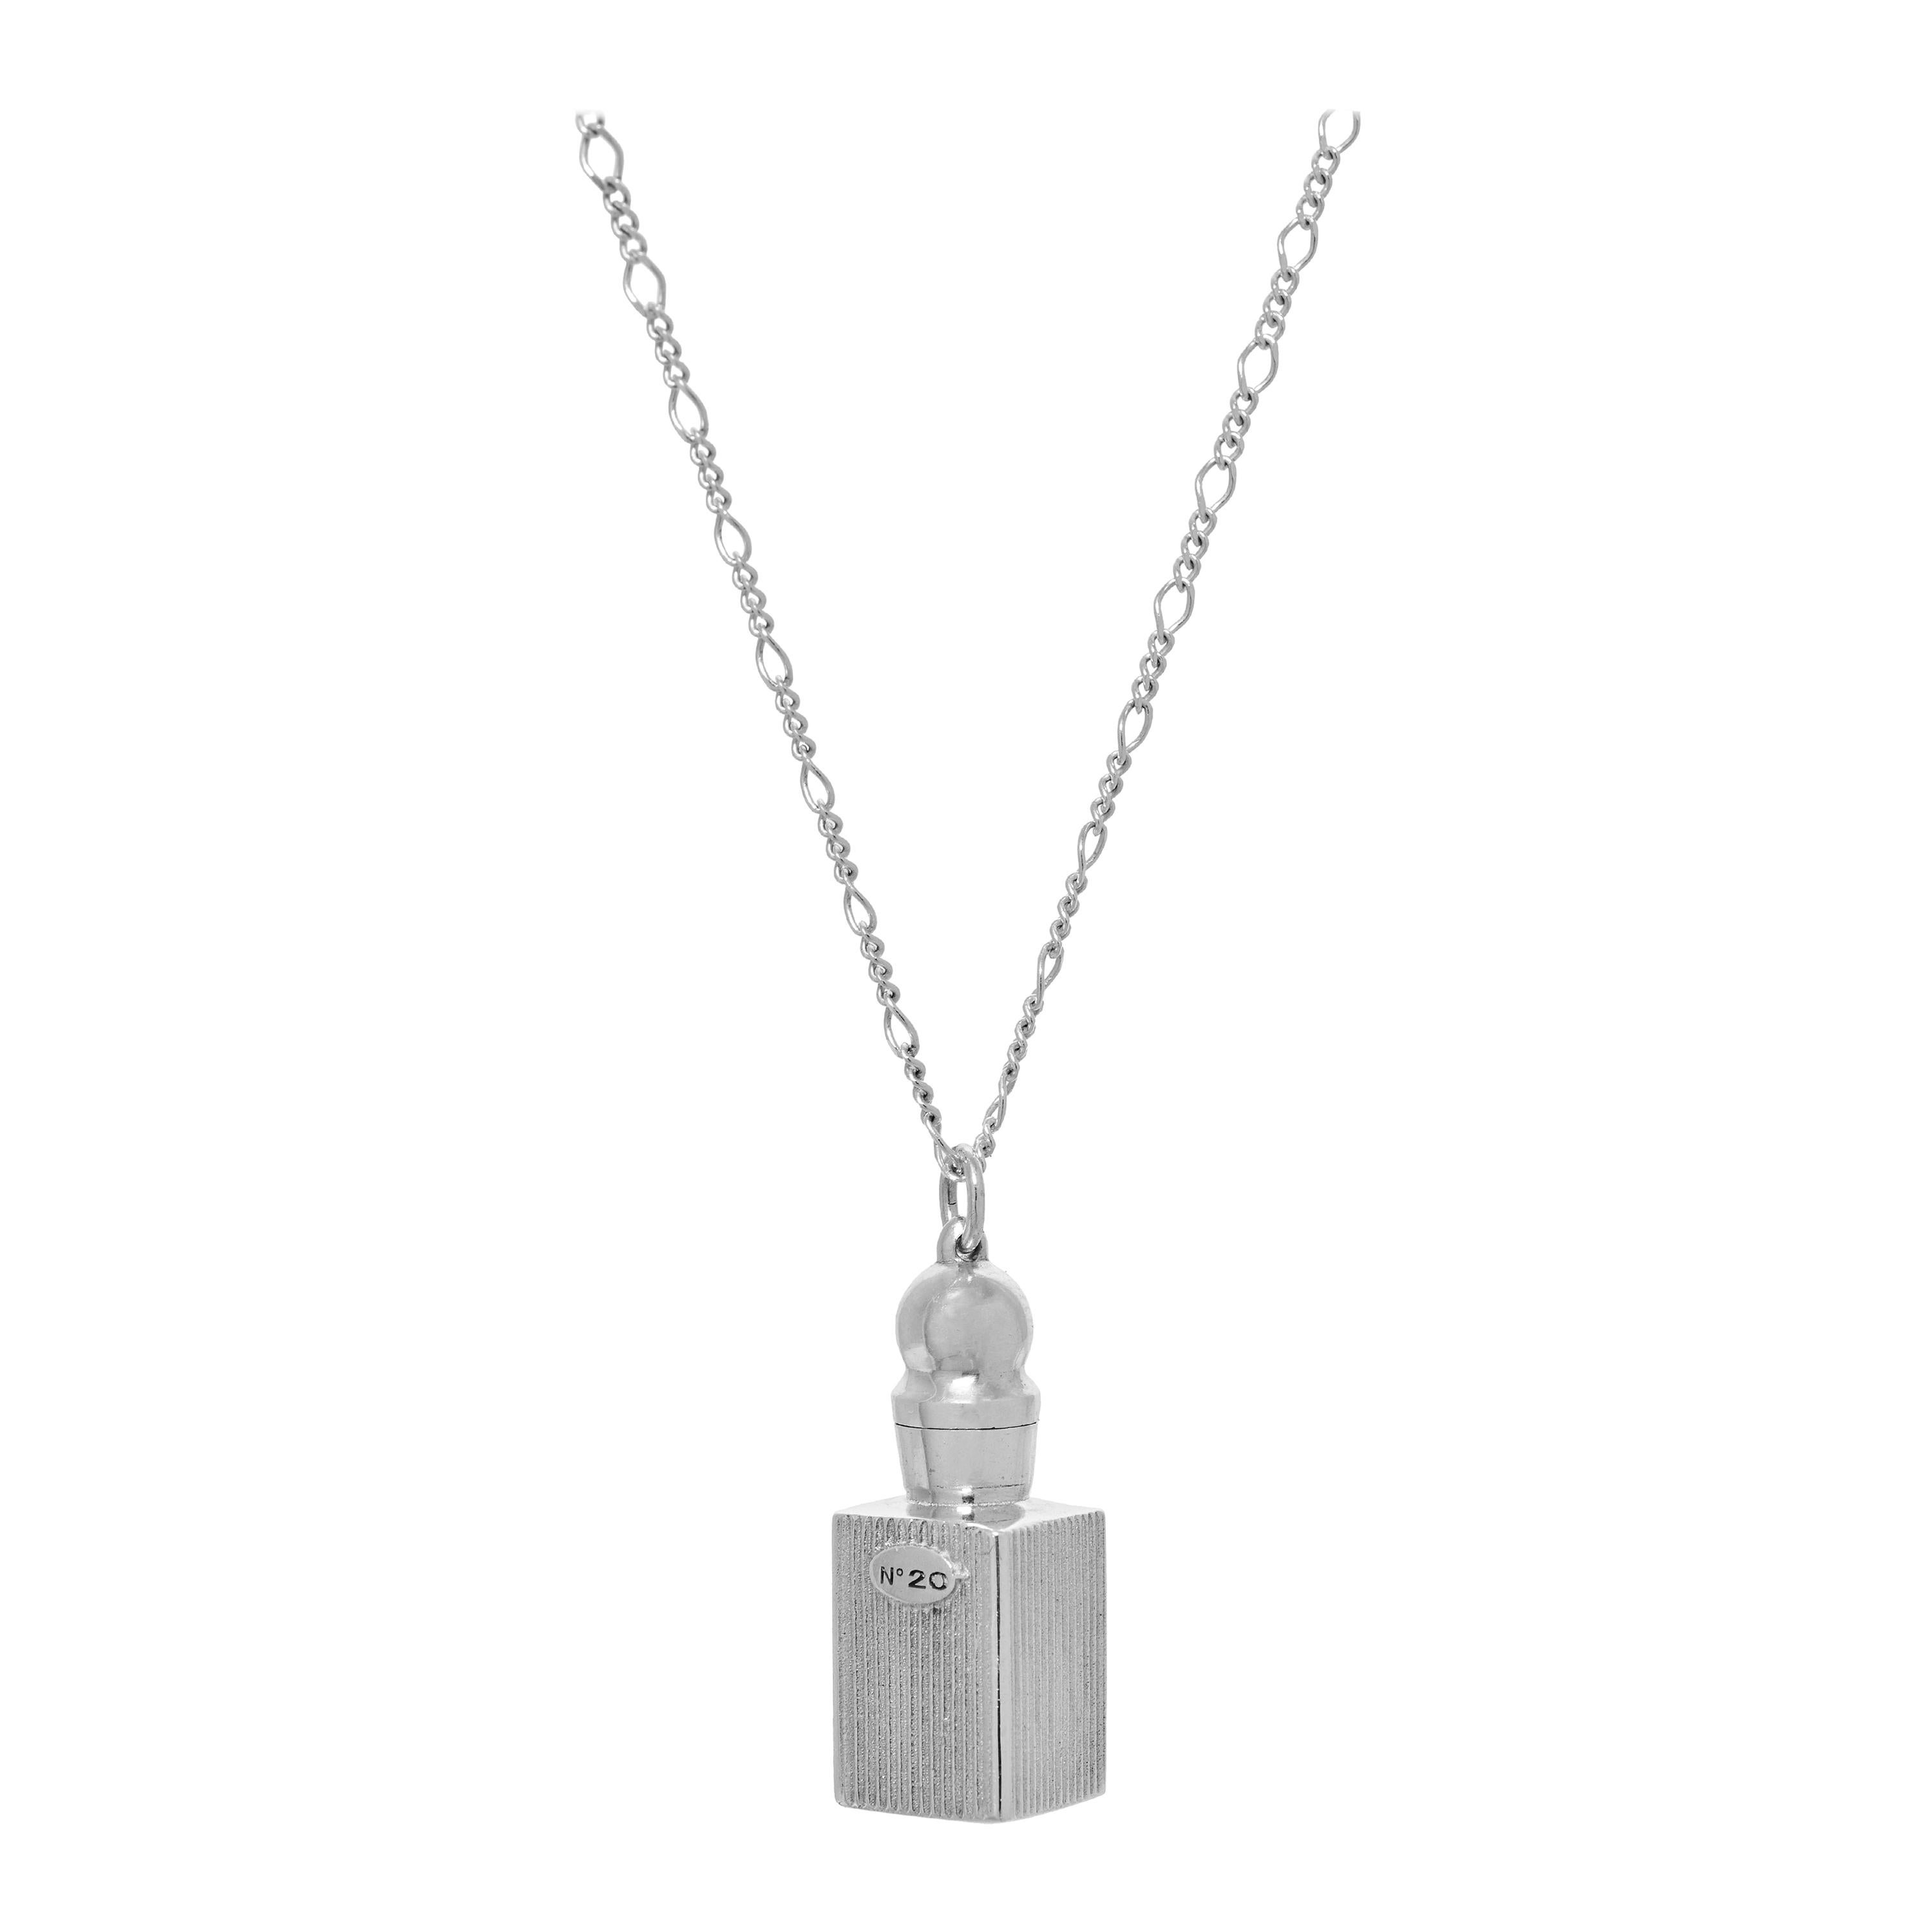 Necklace Chain Pendant Lucky Charm Aroma Bottle  Sterling Silver Greek Jewelry For Sale